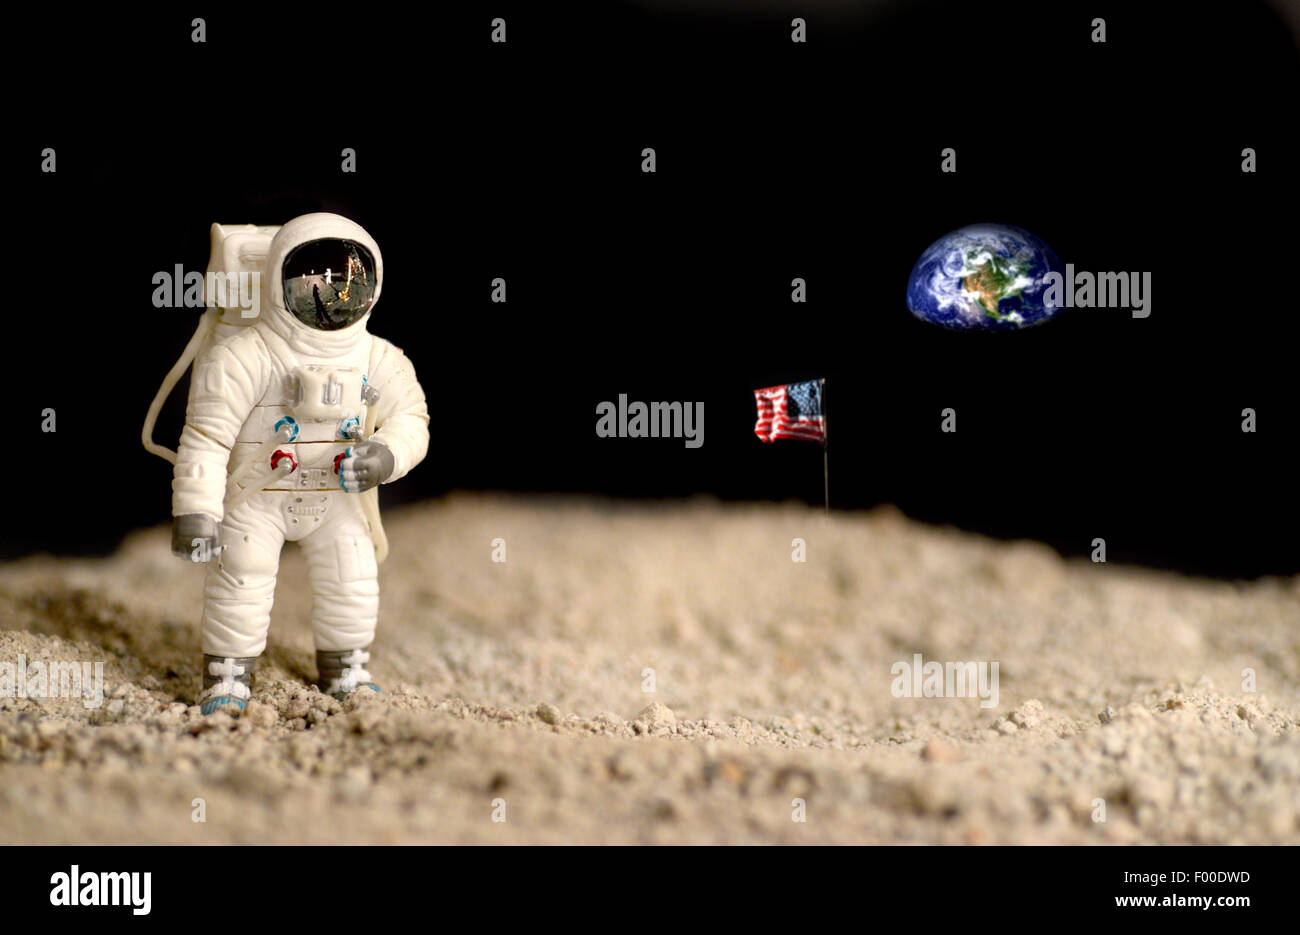 Astronaut on the moon with the earth and the american flag on the background, elements of this image furnished by NASA. Stock Photo